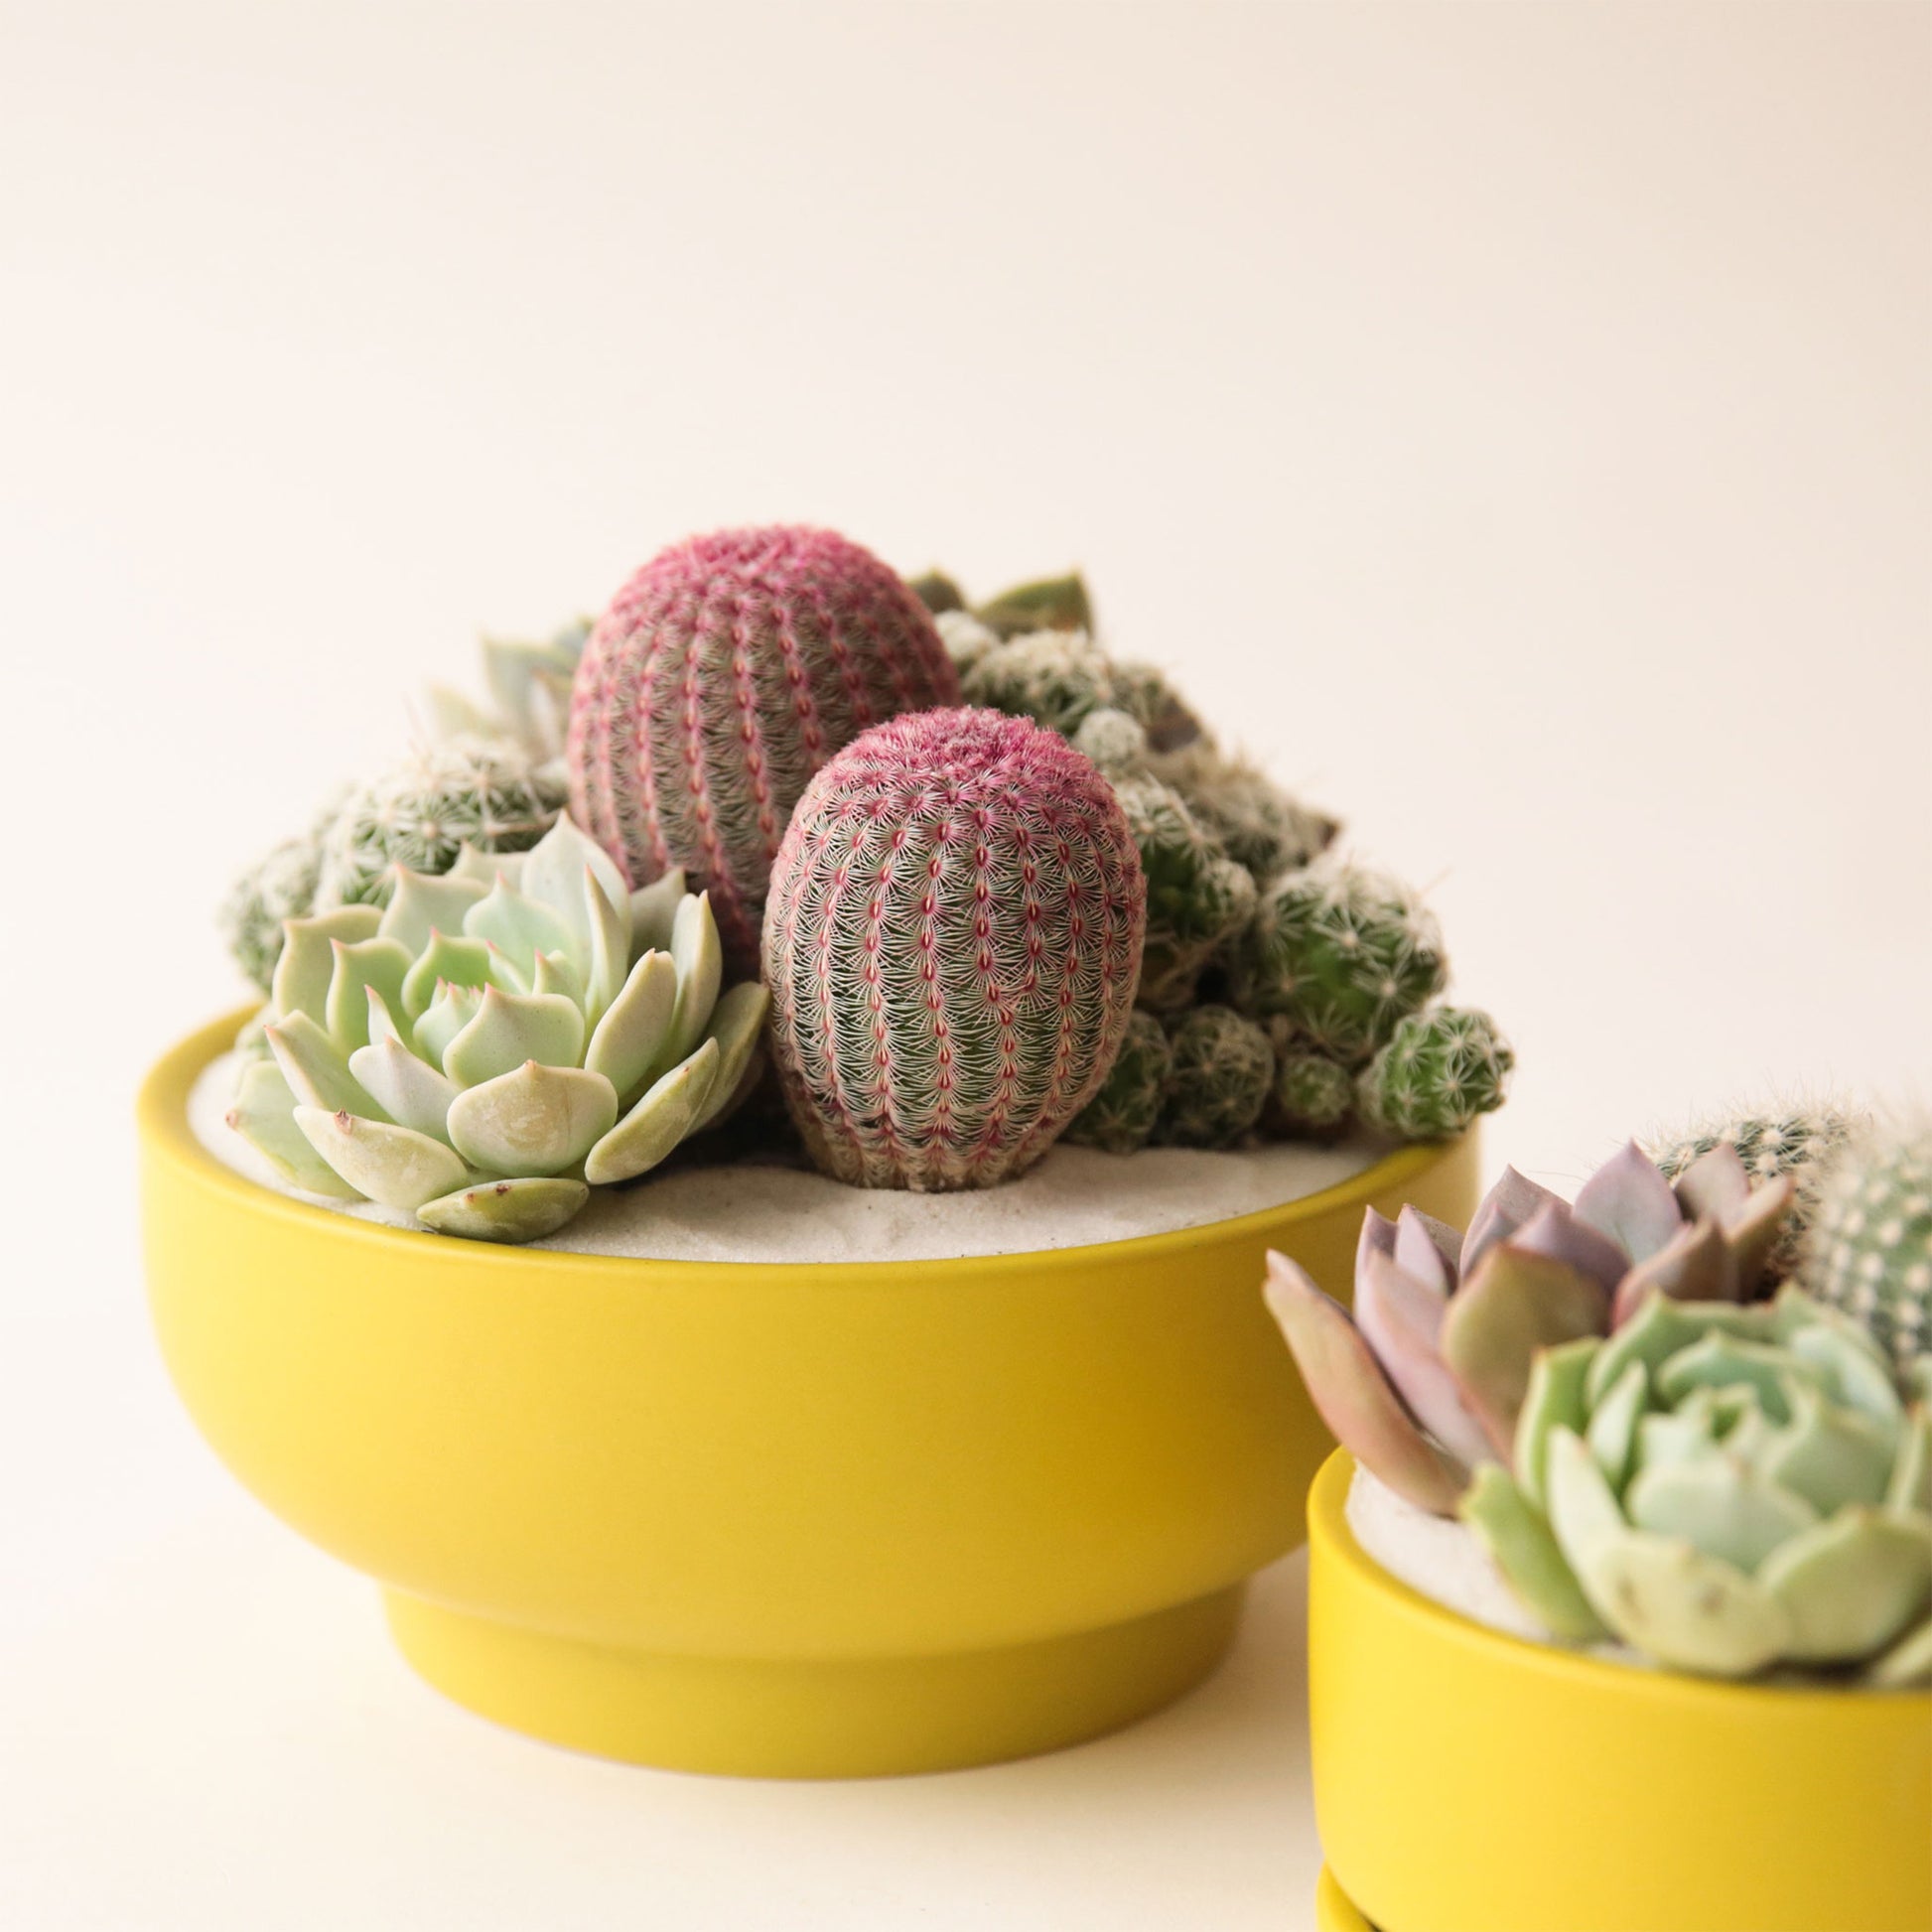 On a cream background is a chartreuse colored ceramic pedestal bowl that is filled with a succulent and cacti arrangement. 